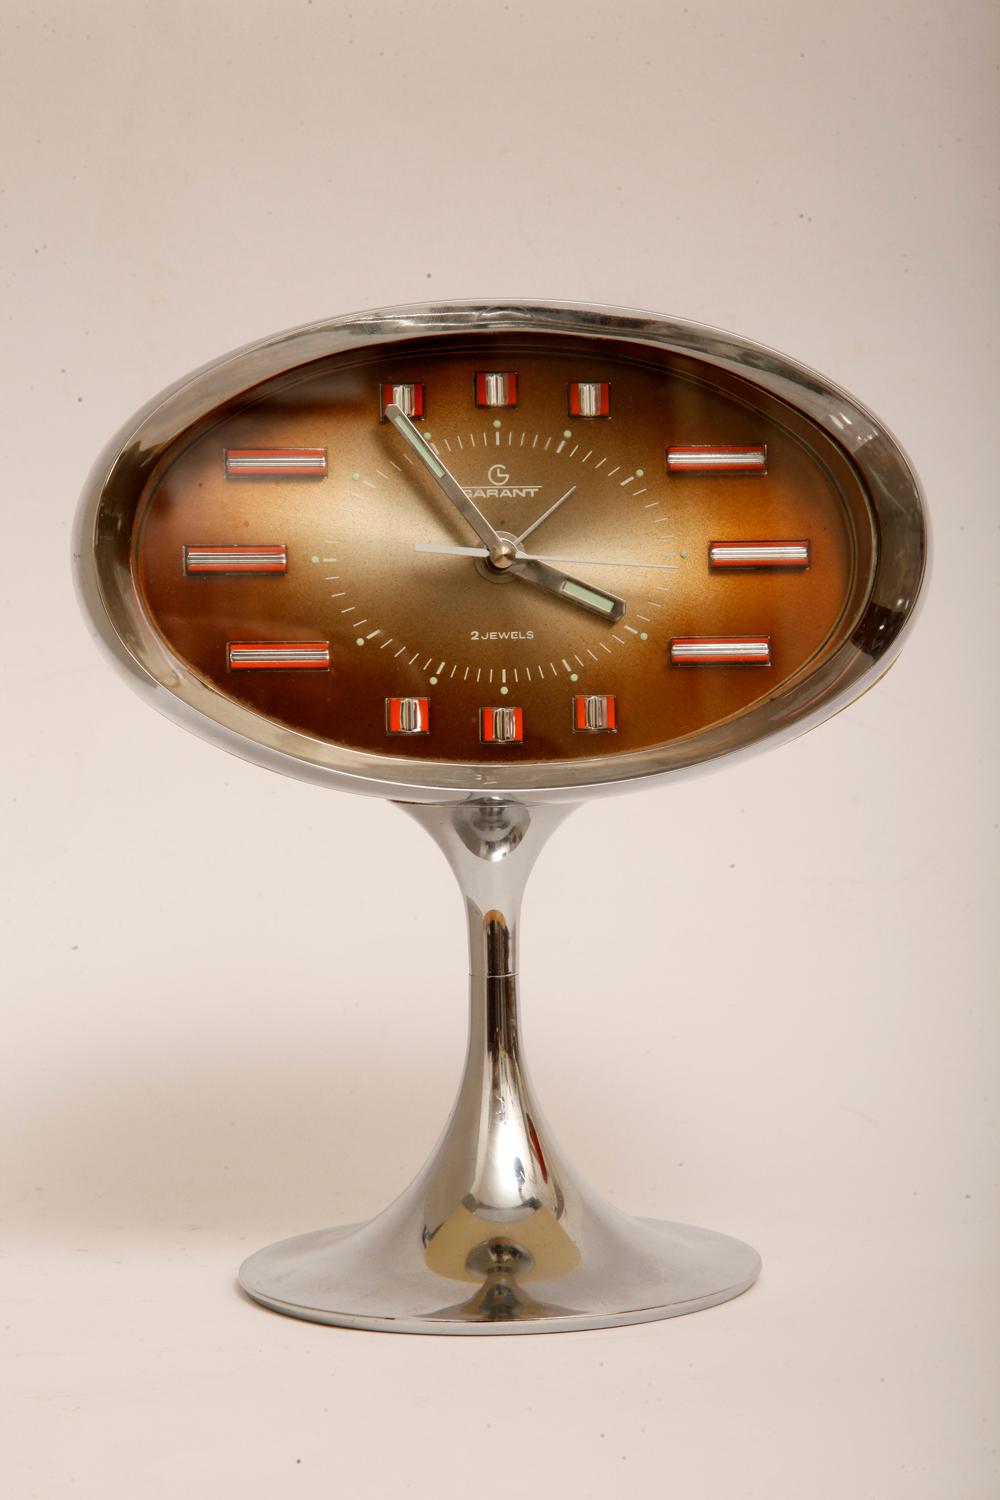 Japanese Space Age Alarm Clock Garant, Plastic and Chromed, 1970s For Sale 6